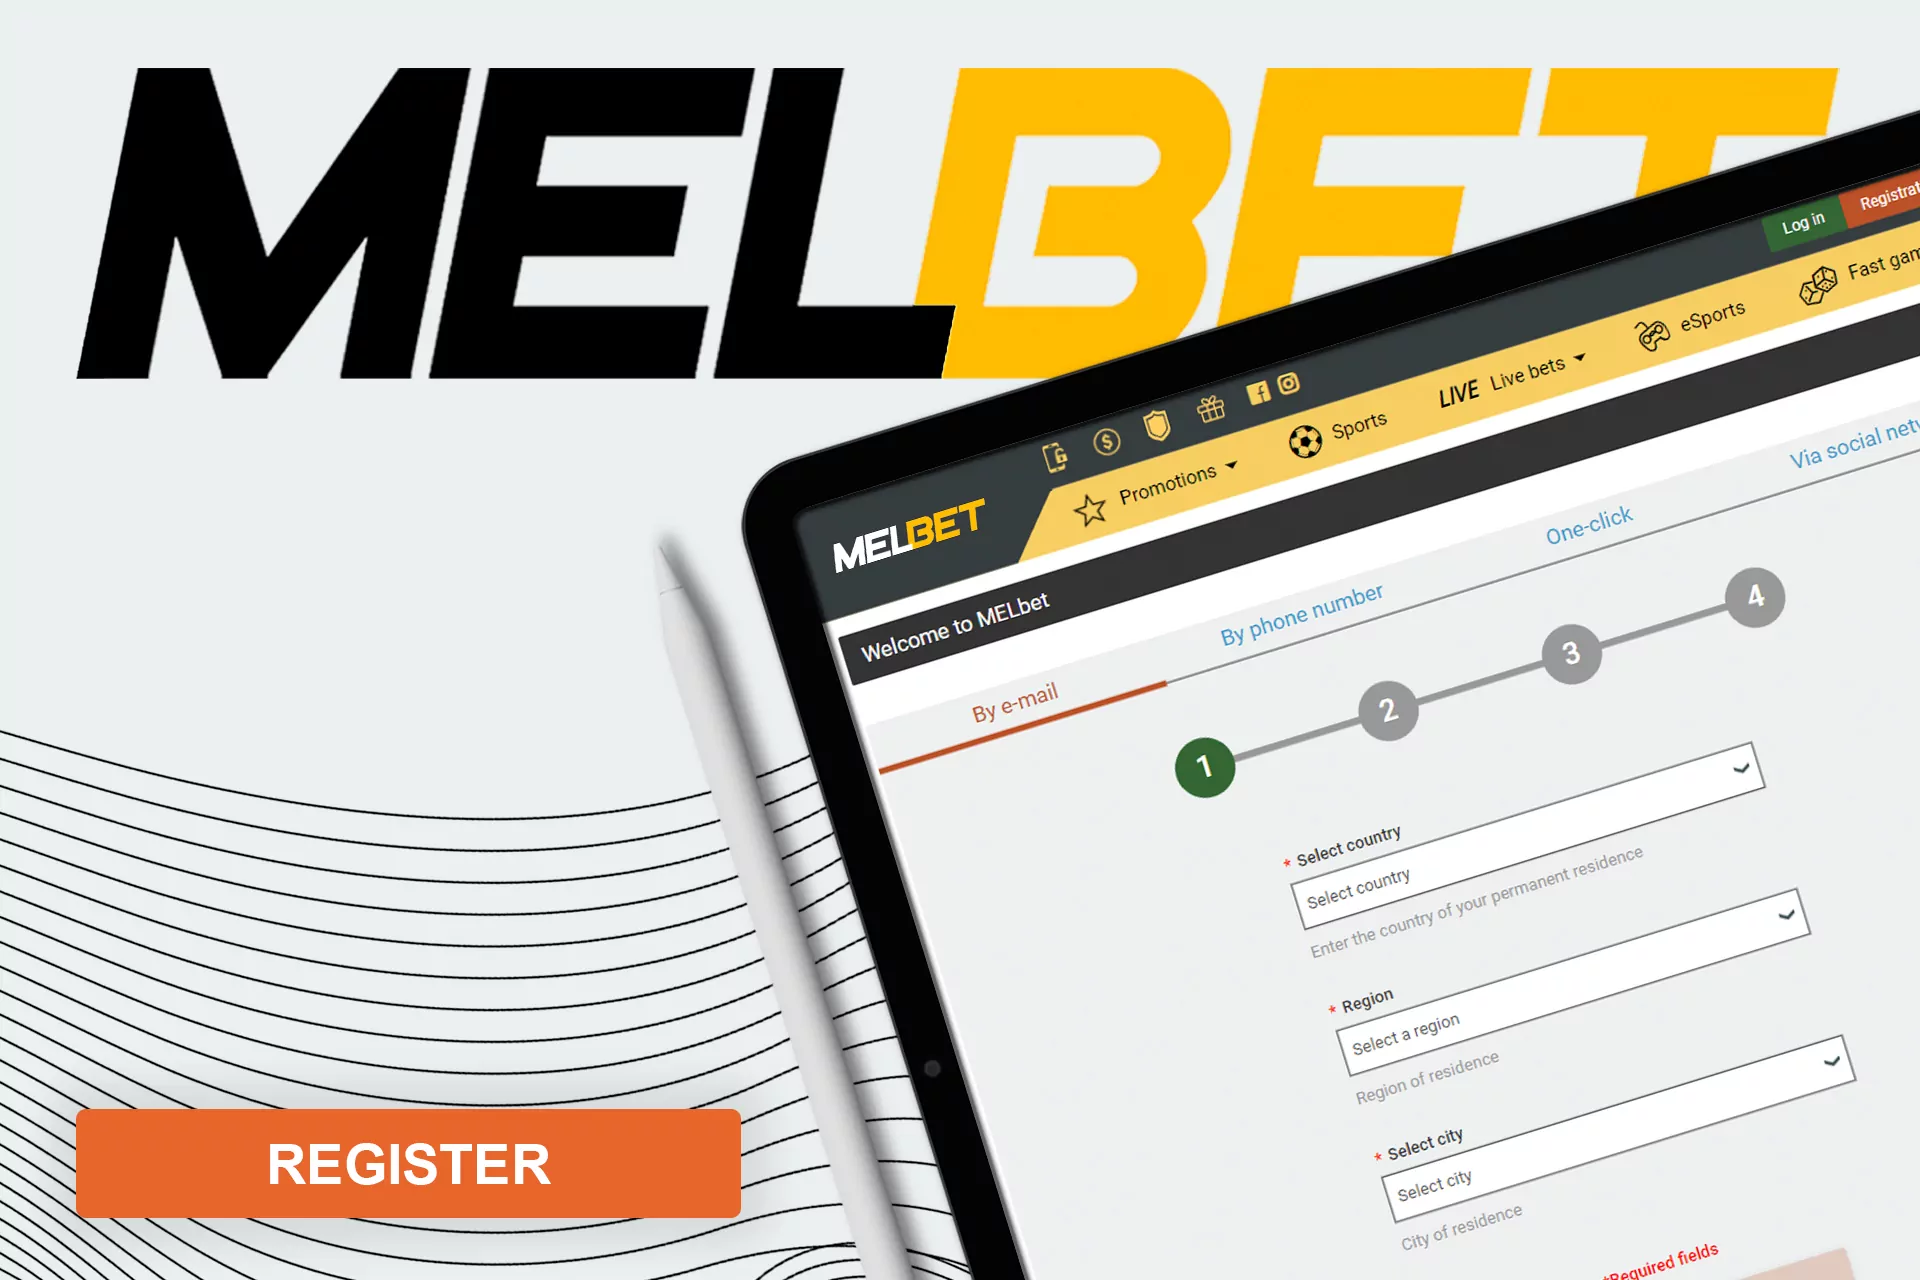 You can use your email to register at Melbet.